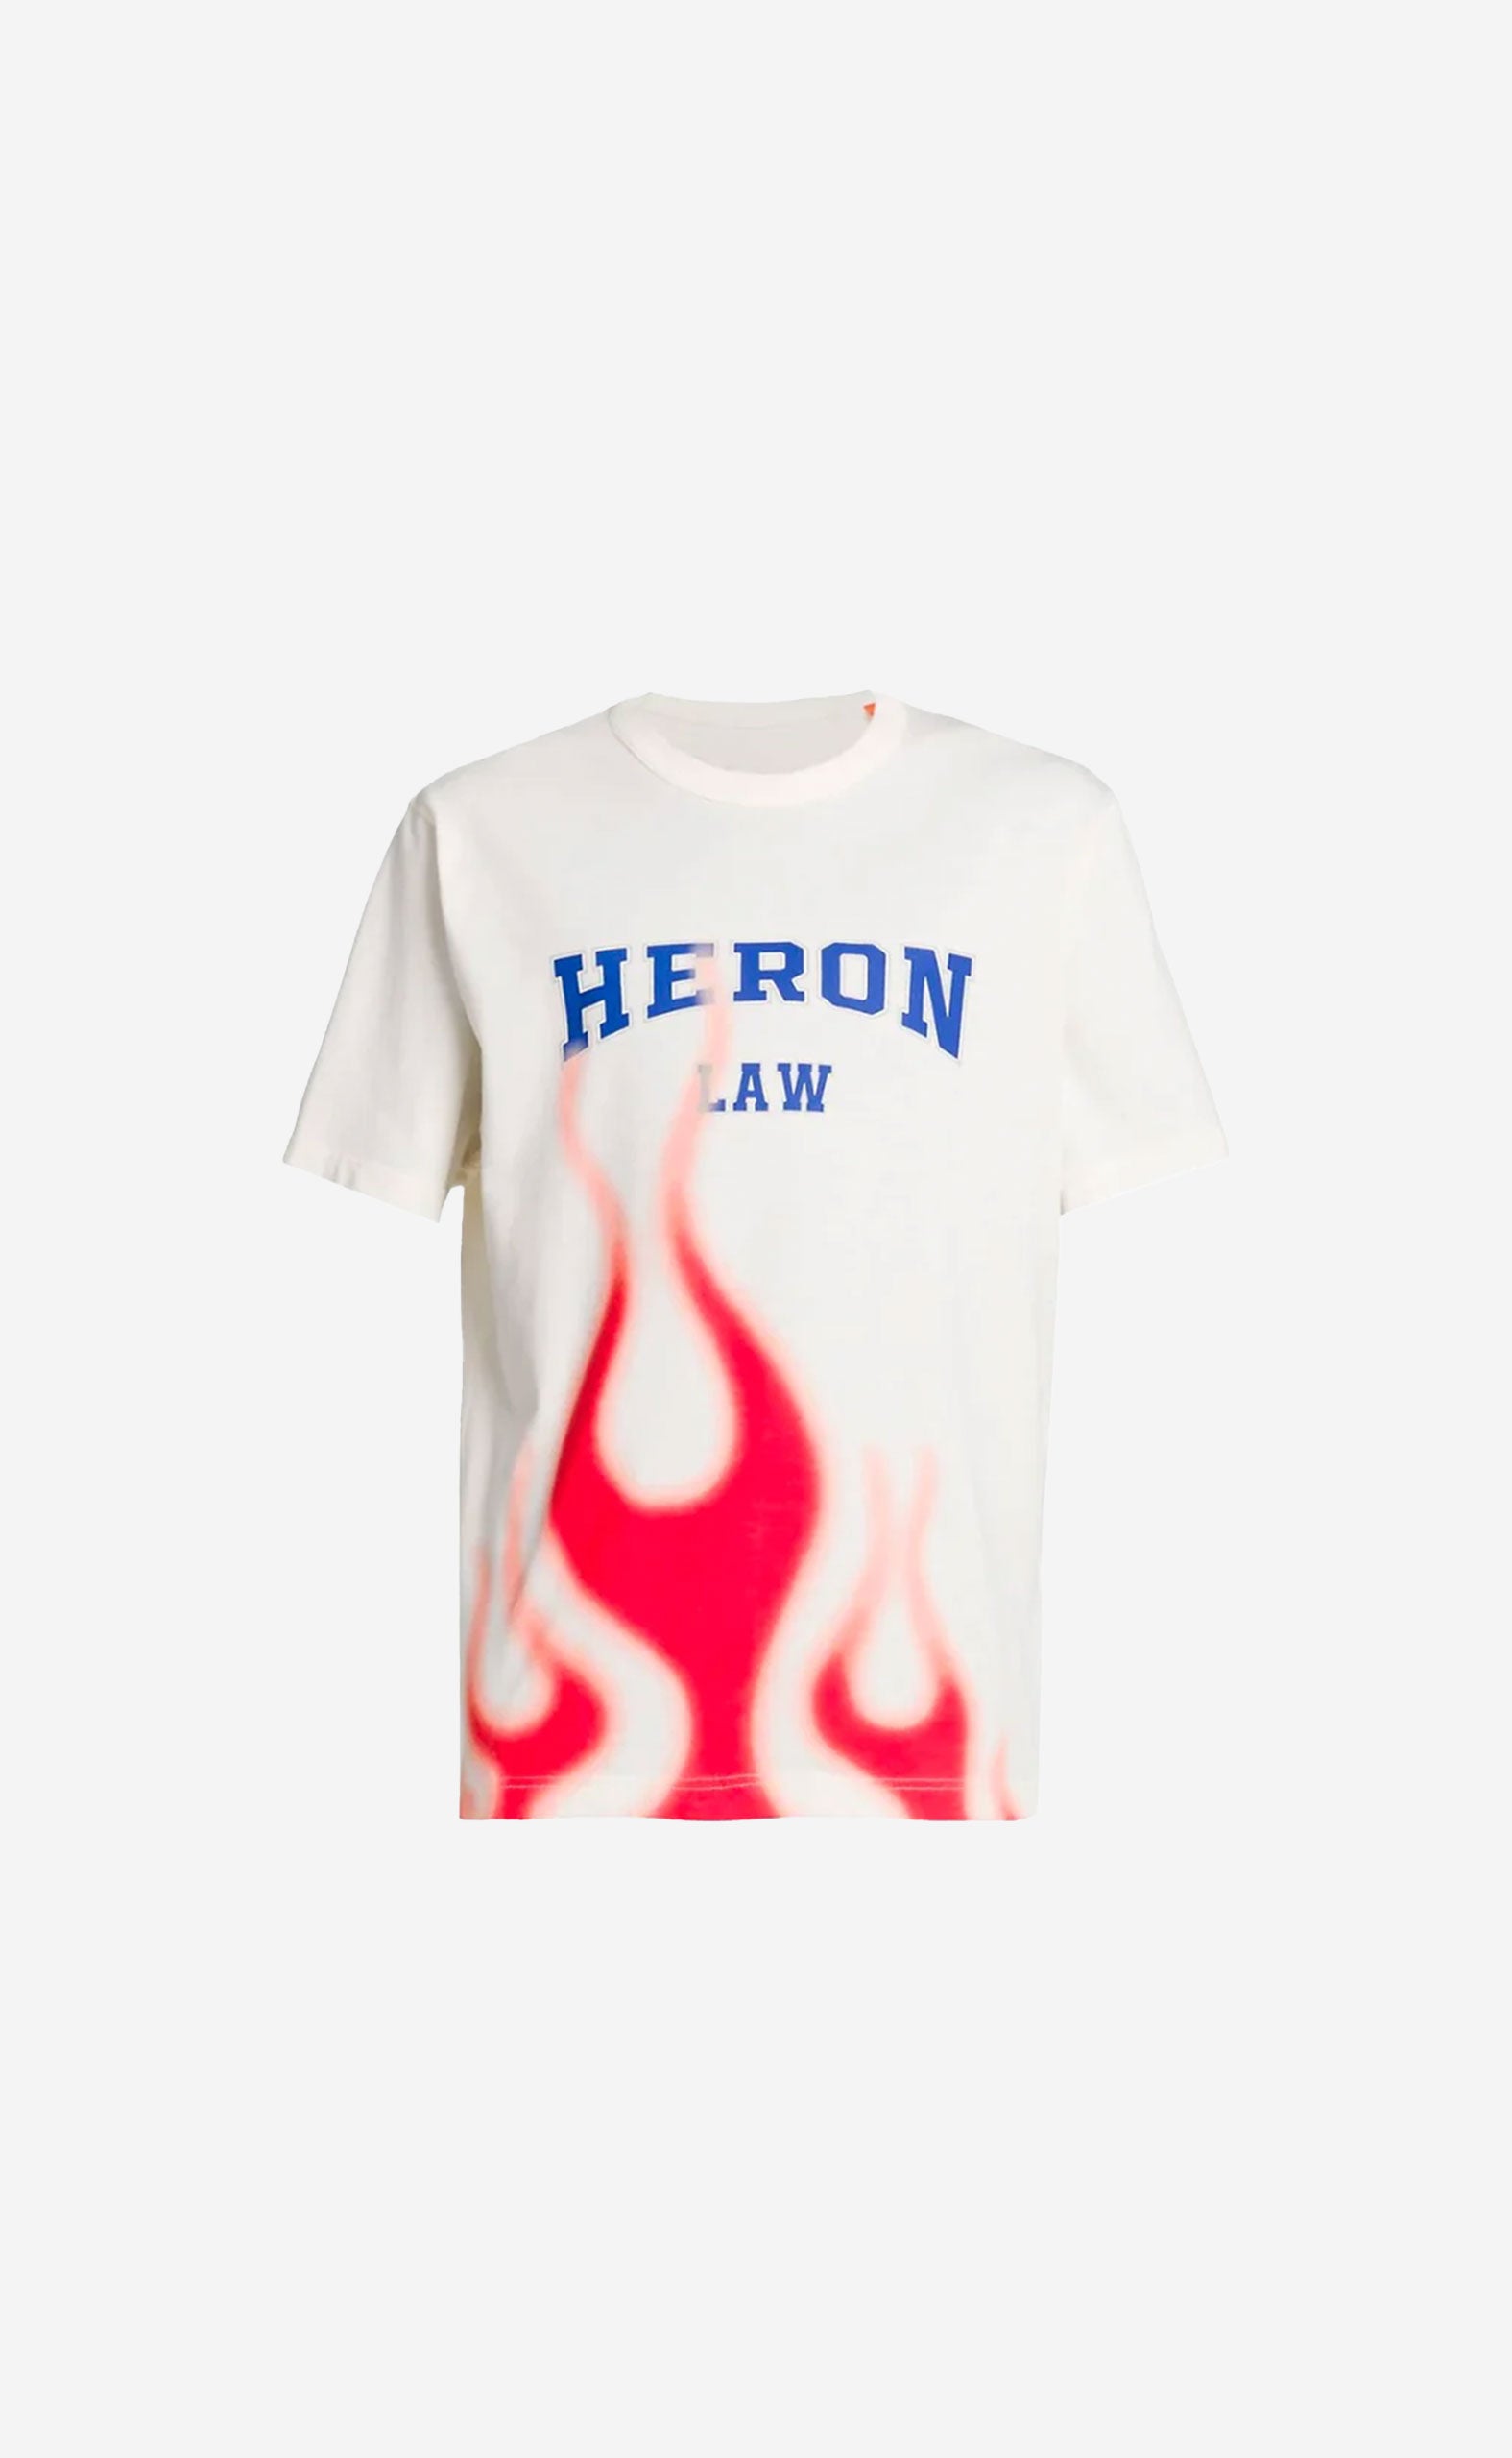 HERON LAW FLAMES SS TEE WHITE RED